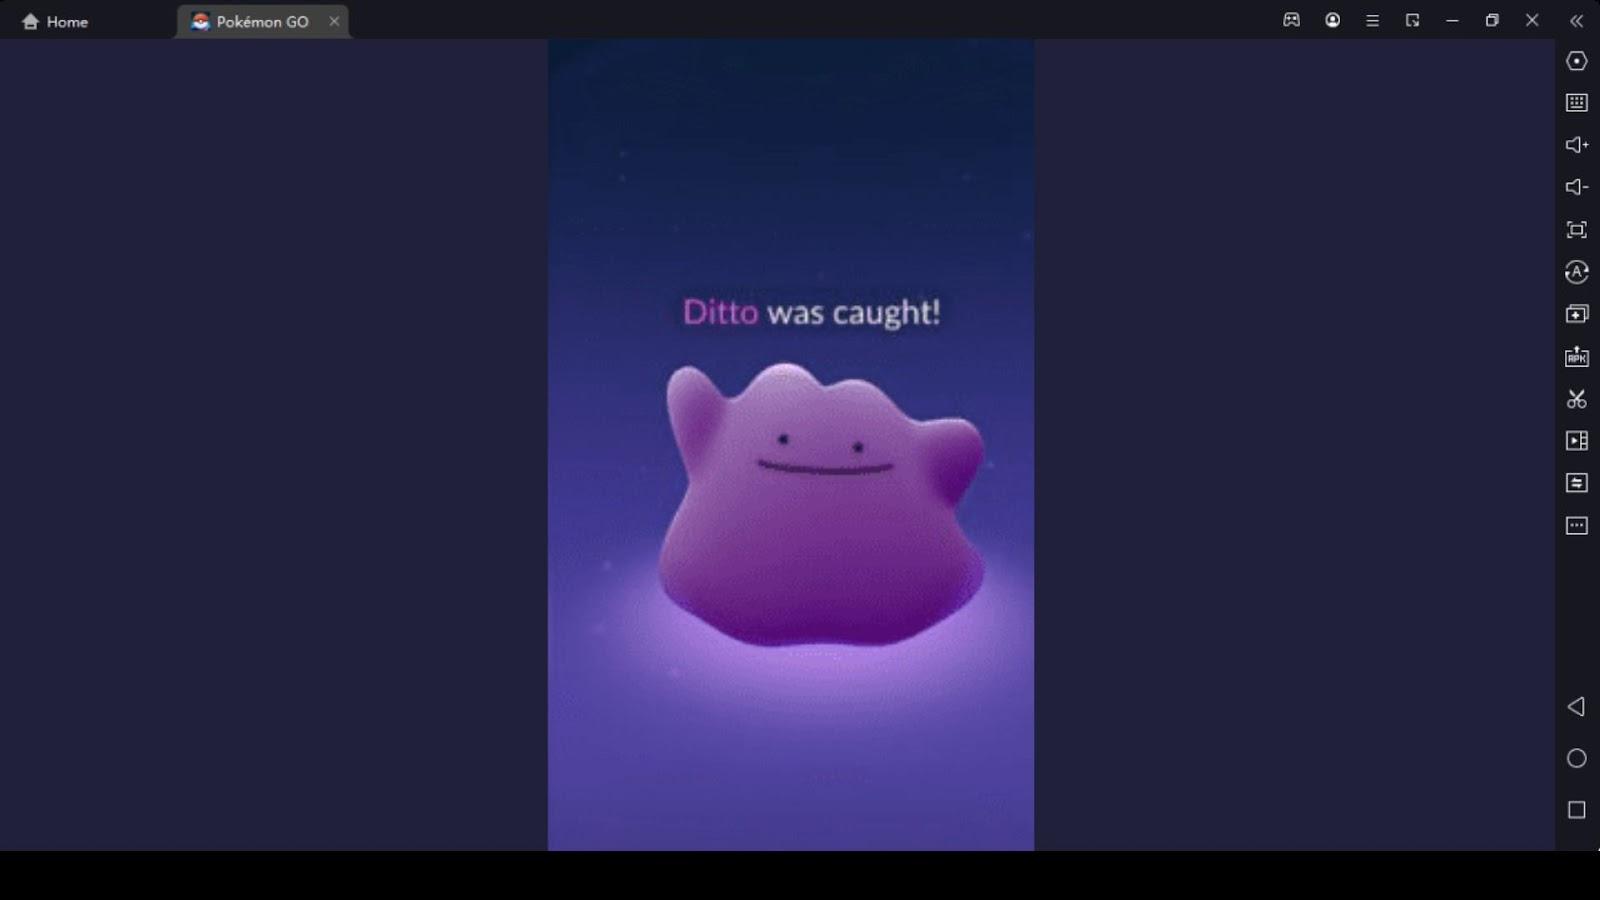 How to Speed Up the Catching Pokémon Go Ditto